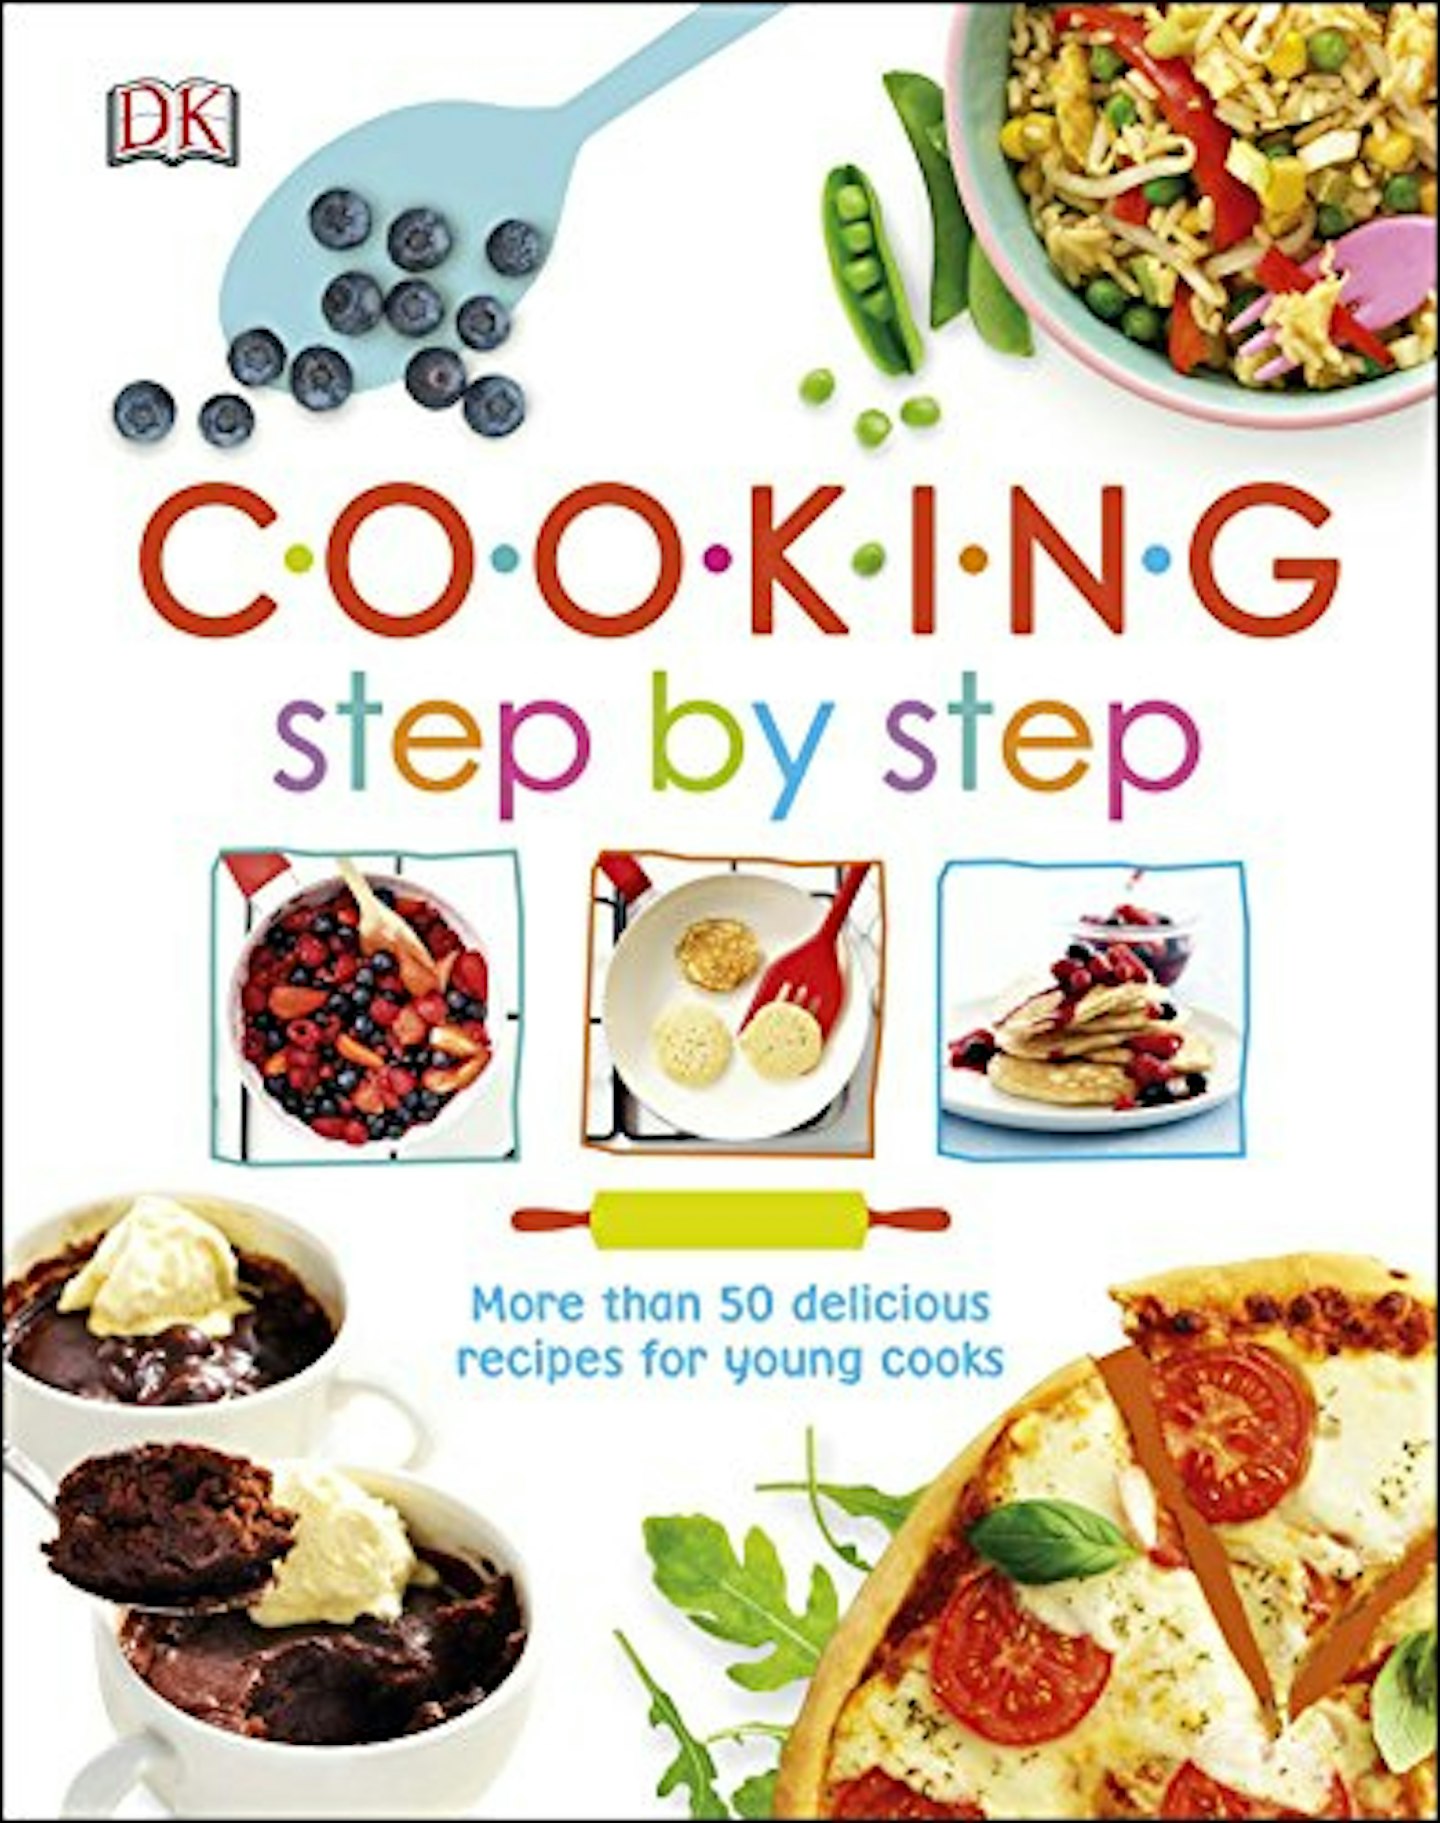 10 Kids Cookbooks To Get Them Excited